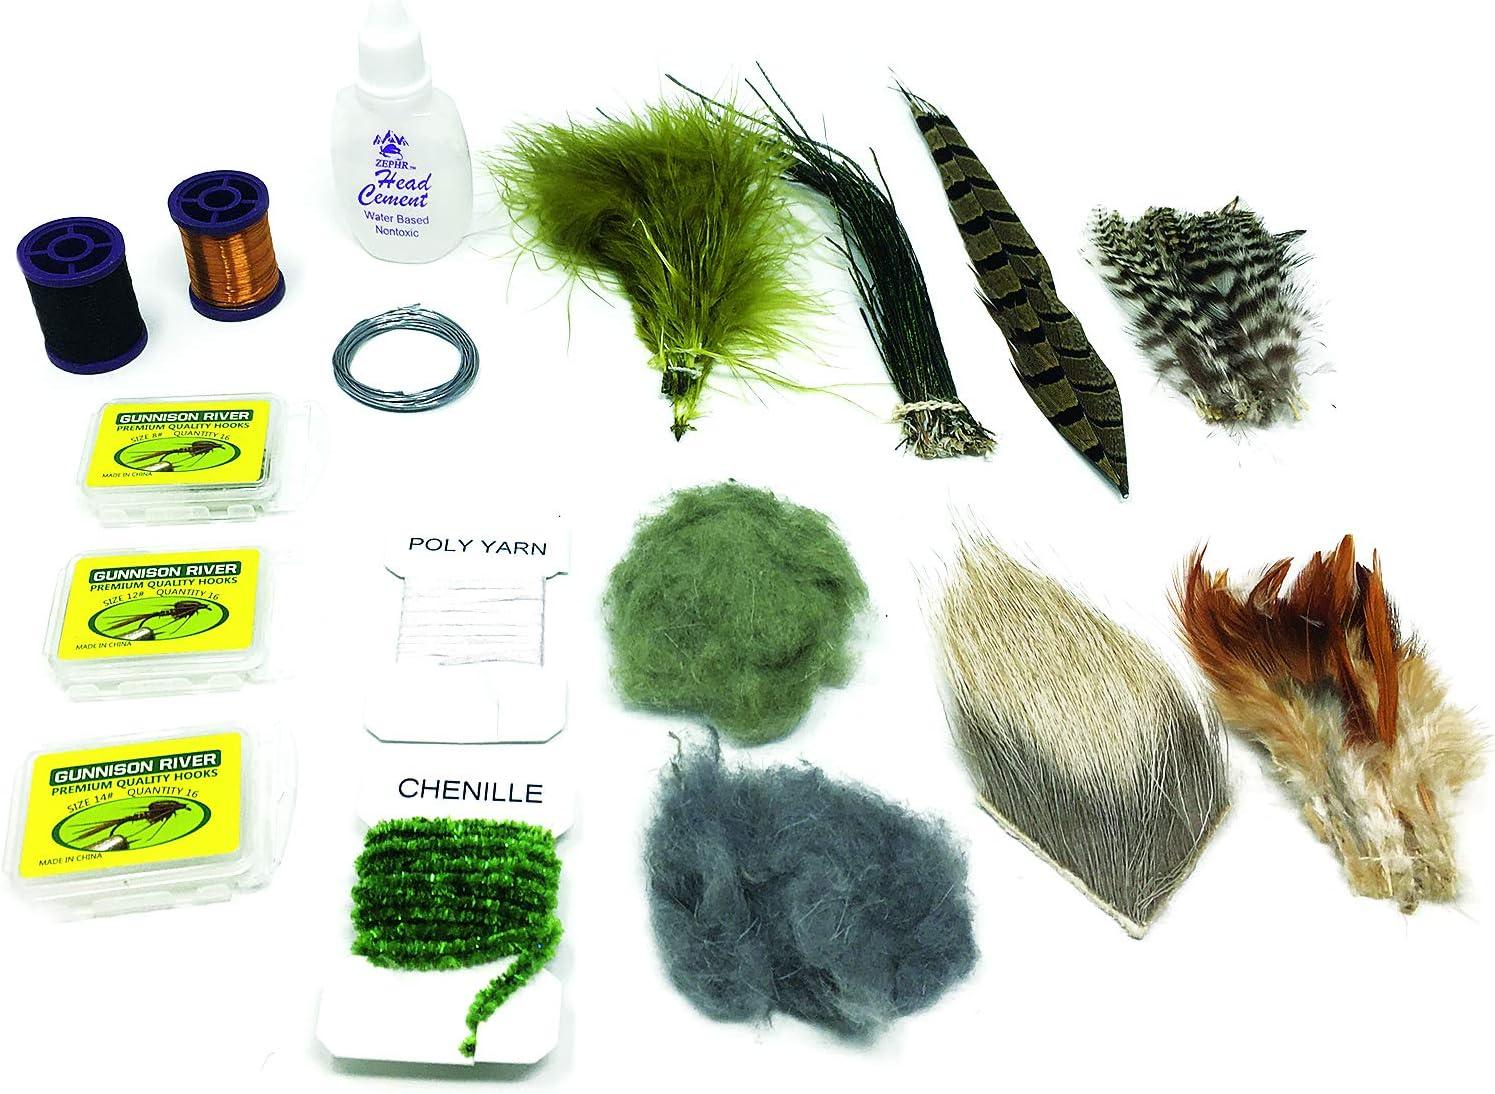 A portable fly tying kit, Global FlyFisher